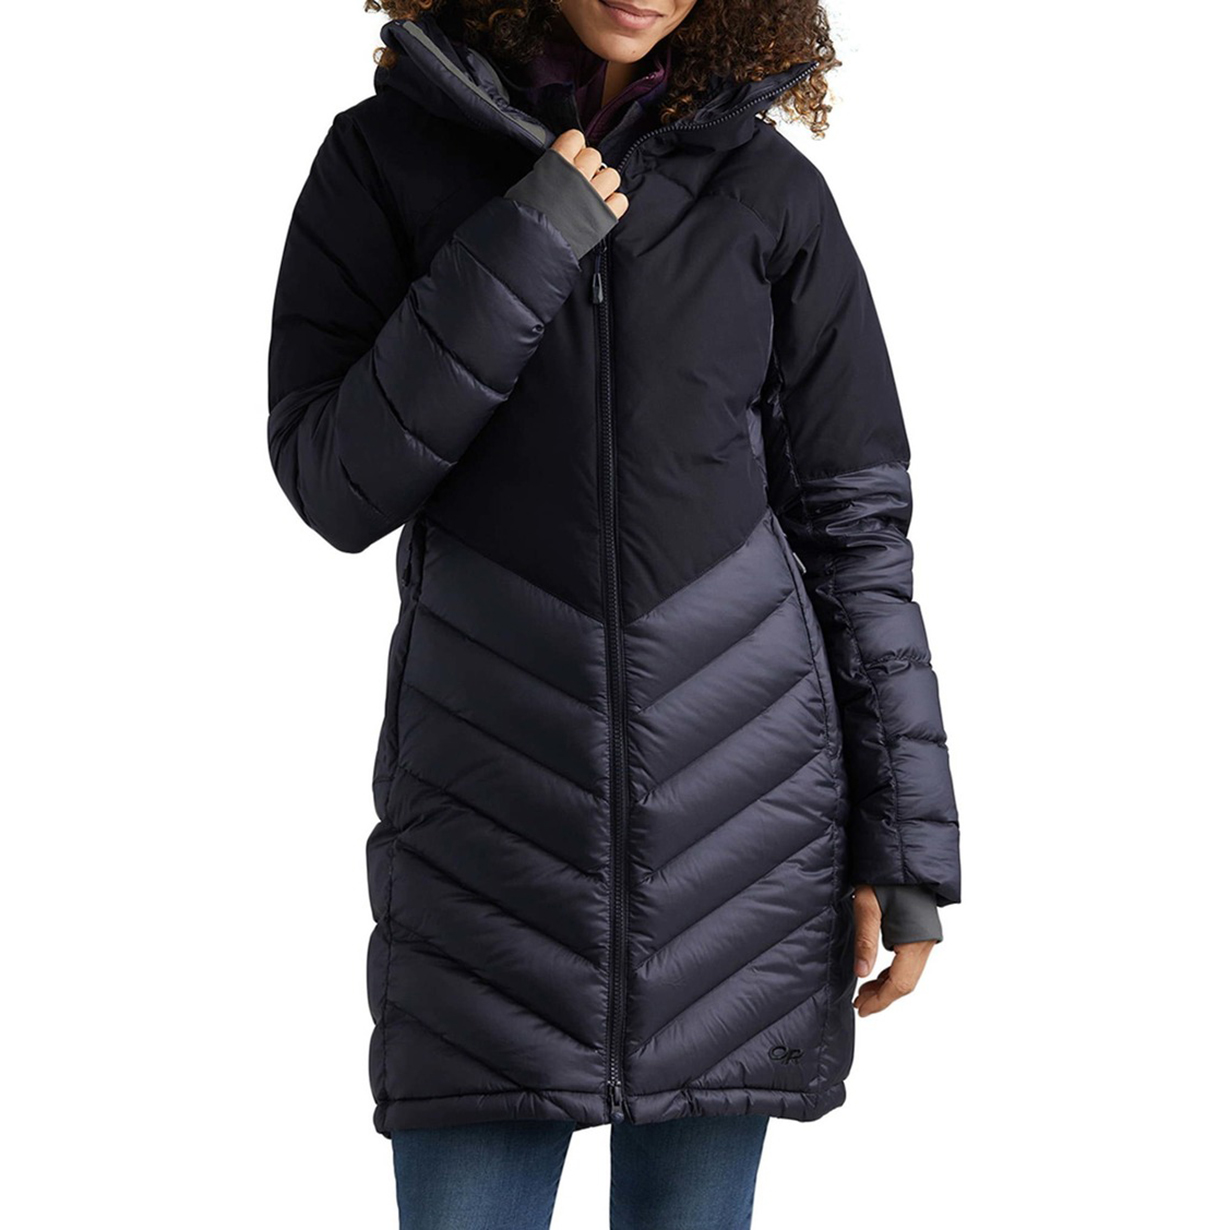 Women's Insulated Parka & Jacket Roundup | Blister